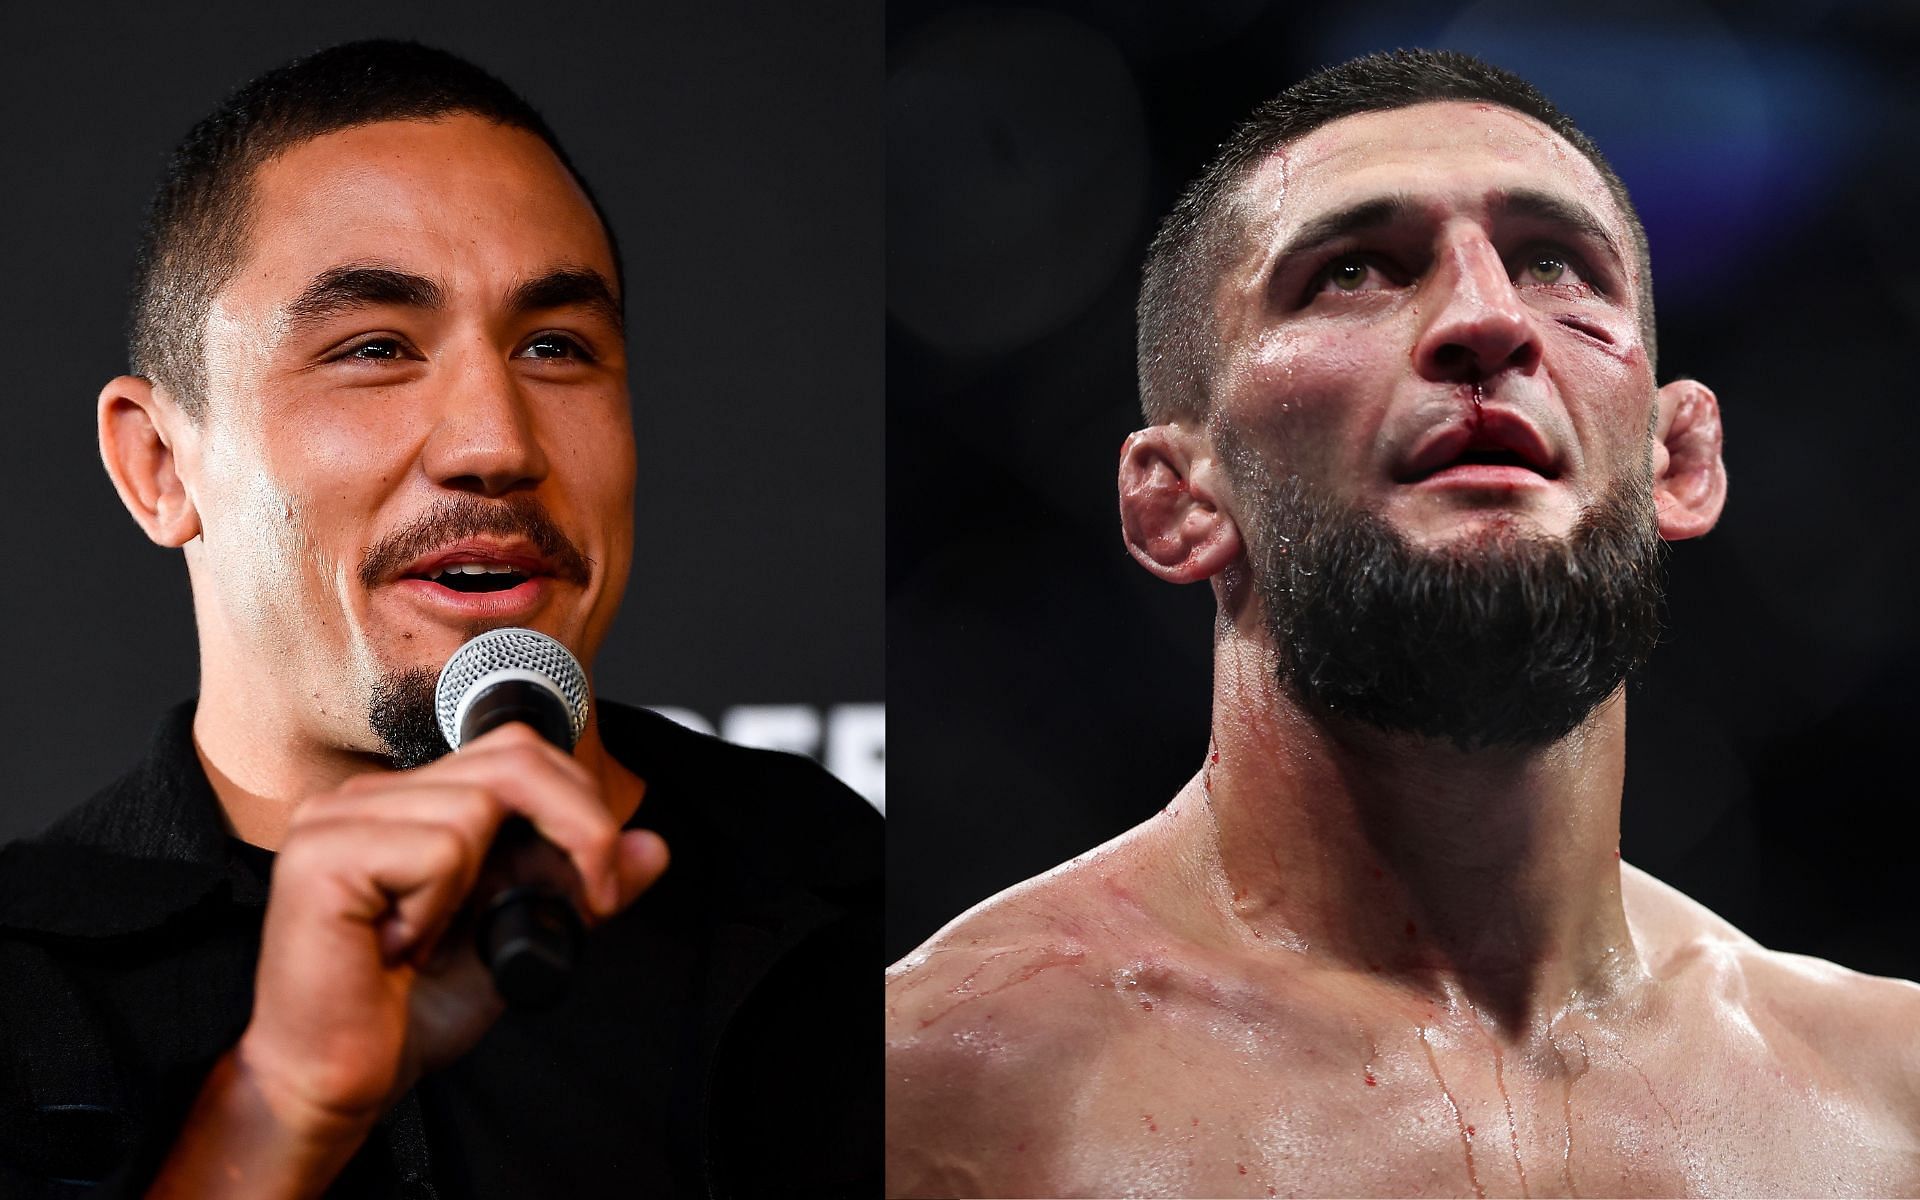 Robert Whittaker (left) will take on Khamzat Chimaev (right) in his next fight. [via Getty Images]